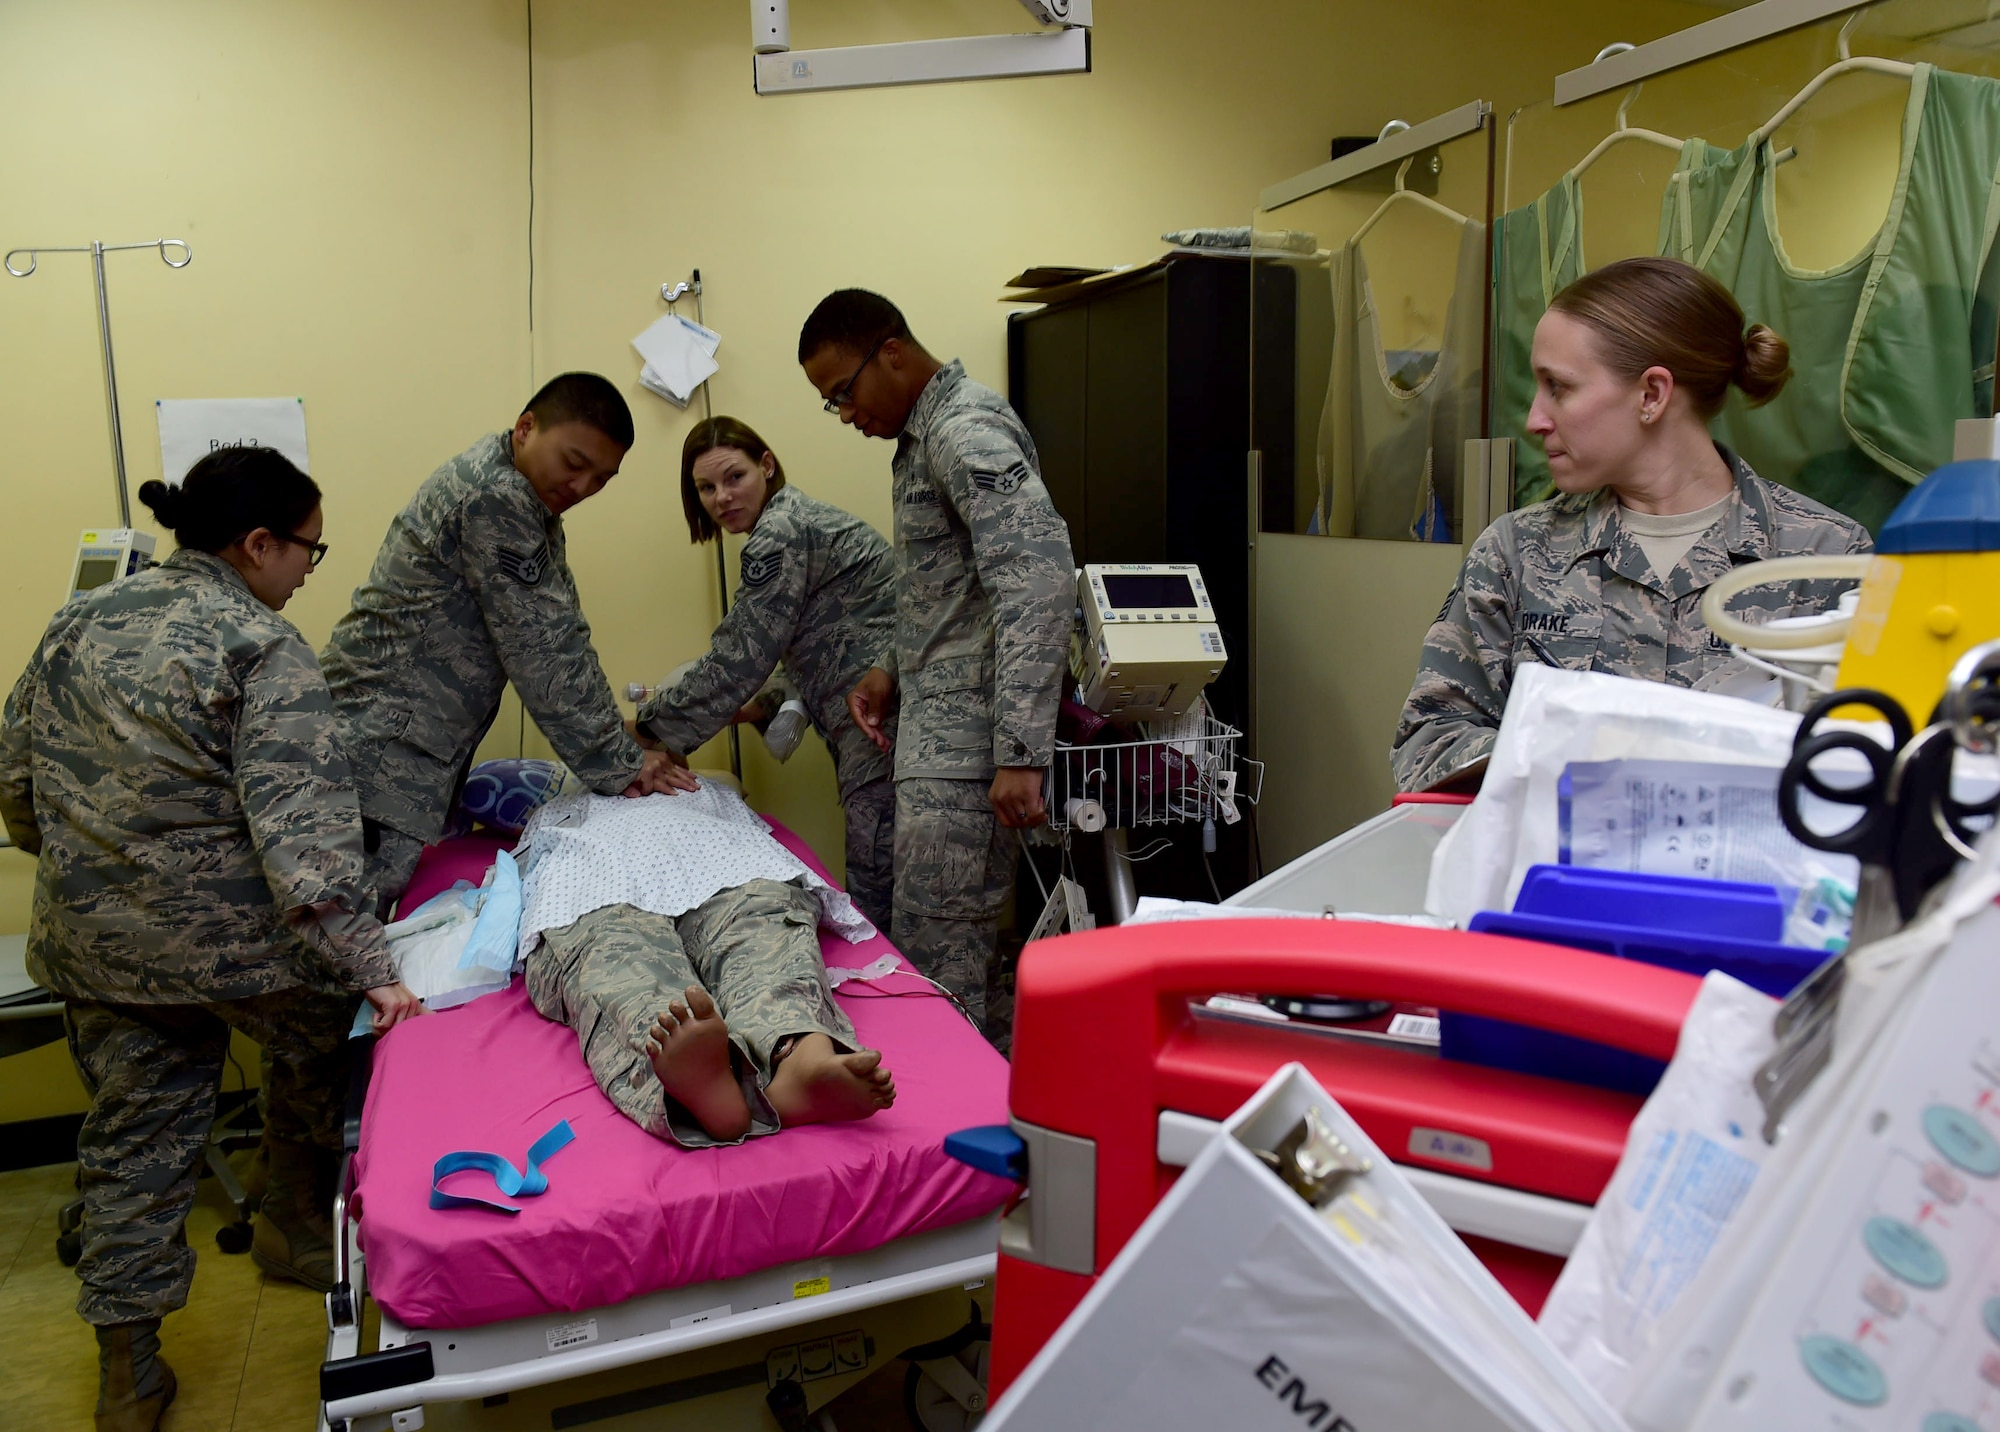 Members from the 386th Expeditionary Medical Group work together to coordinate emergency interventions during a Code Blue exercise at an undisclosed location in Southwest Asia, Nov. 28, 2015. The pupose of the exercise is to assess the team’s readiness in the event of a medical emergency. (U.S. Air Force photo by Staff Sgt. Jerilyn Quintanilla)